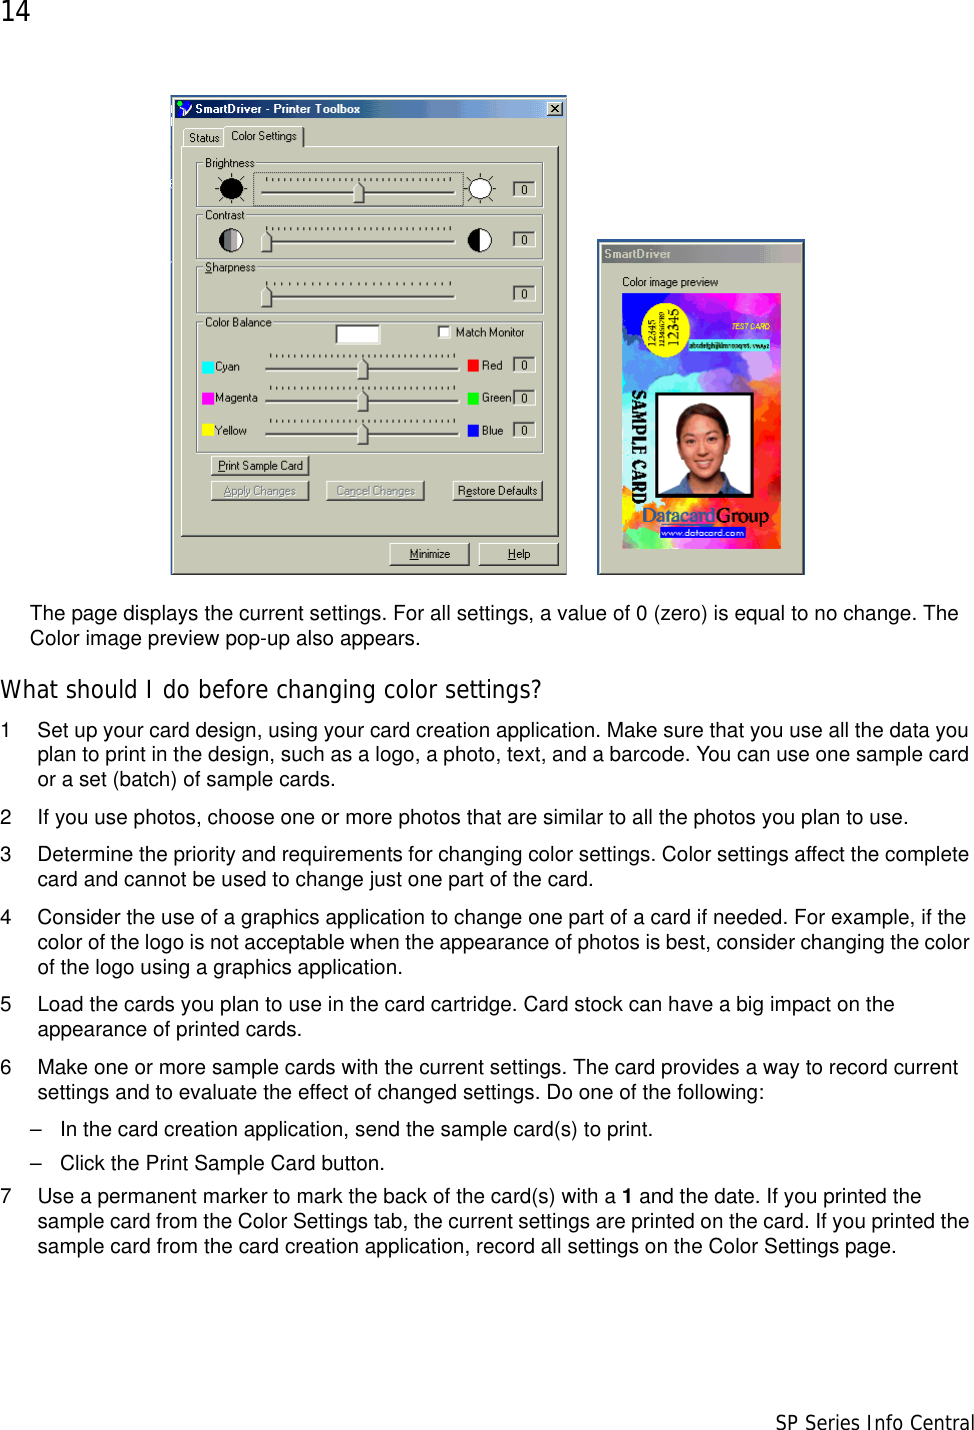 14                      SP Series Info Central The page displays the current settings. For all settings, a value of 0 (zero) is equal to no change. The Color image preview pop-up also appears. What should I do before changing color settings?1 Set up your card design, using your card creation application. Make sure that you use all the data you plan to print in the design, such as a logo, a photo, text, and a barcode. You can use one sample card or a set (batch) of sample cards.2 If you use photos, choose one or more photos that are similar to all the photos you plan to use. 3 Determine the priority and requirements for changing color settings. Color settings affect the complete card and cannot be used to change just one part of the card. 4 Consider the use of a graphics application to change one part of a card if needed. For example, if the color of the logo is not acceptable when the appearance of photos is best, consider changing the color of the logo using a graphics application.5 Load the cards you plan to use in the card cartridge. Card stock can have a big impact on the appearance of printed cards.6 Make one or more sample cards with the current settings. The card provides a way to record current settings and to evaluate the effect of changed settings. Do one of the following:– In the card creation application, send the sample card(s) to print.– Click the Print Sample Card button.7 Use a permanent marker to mark the back of the card(s) with a 1 and the date. If you printed the sample card from the Color Settings tab, the current settings are printed on the card. If you printed the sample card from the card creation application, record all settings on the Color Settings page.